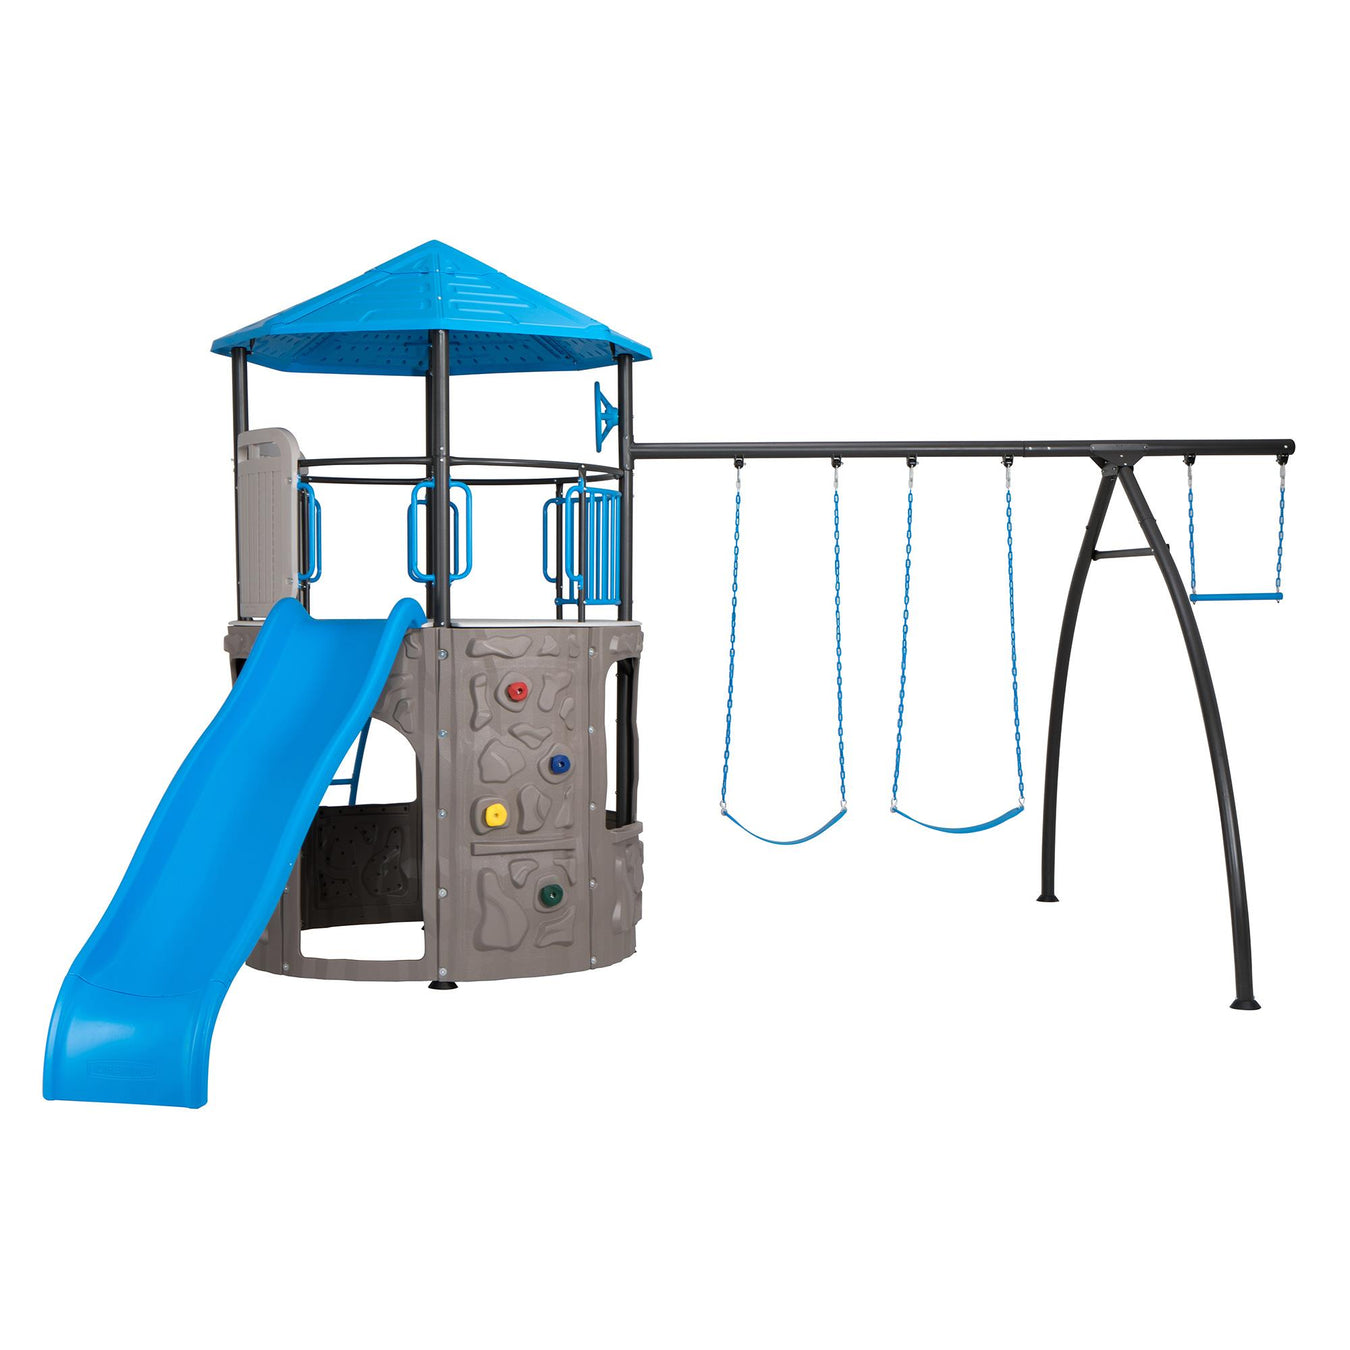 Lifetime Adventure Tower Playset with a blue slide and swing set on a white background.